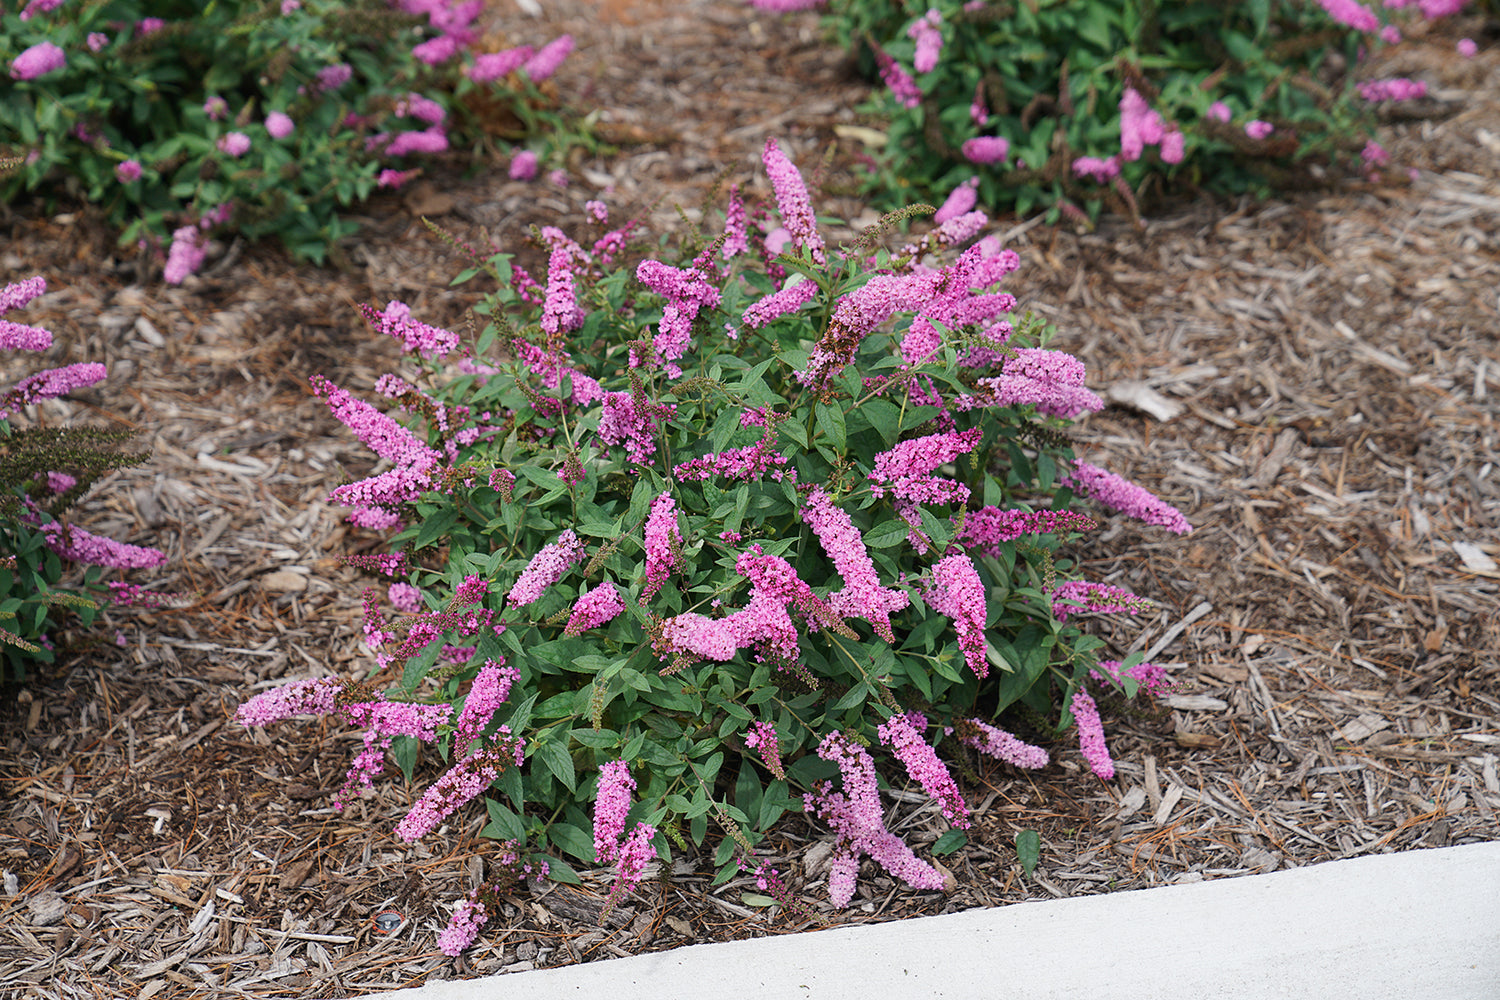 Buddleia Lo &amp; Behold Pink Micro Chip has a small and tidy habit that fits anywhere